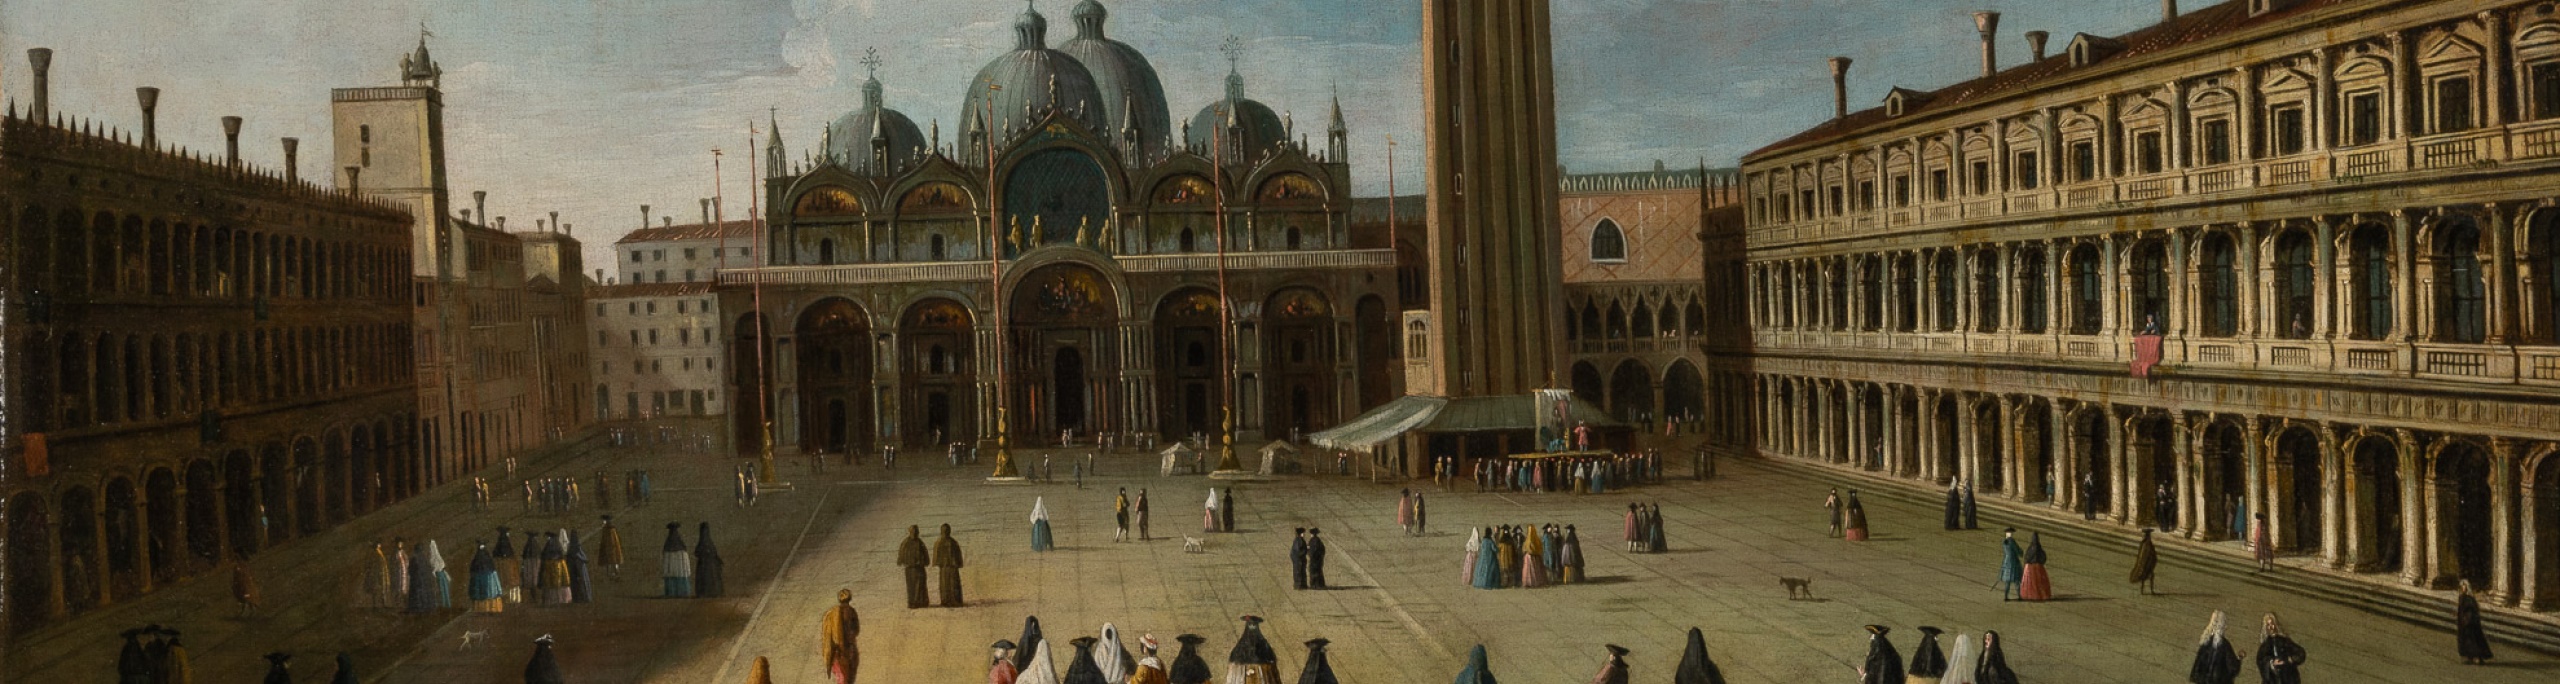 The Grand Tour, Venetian Painting, and a View of the Piazza San Marco